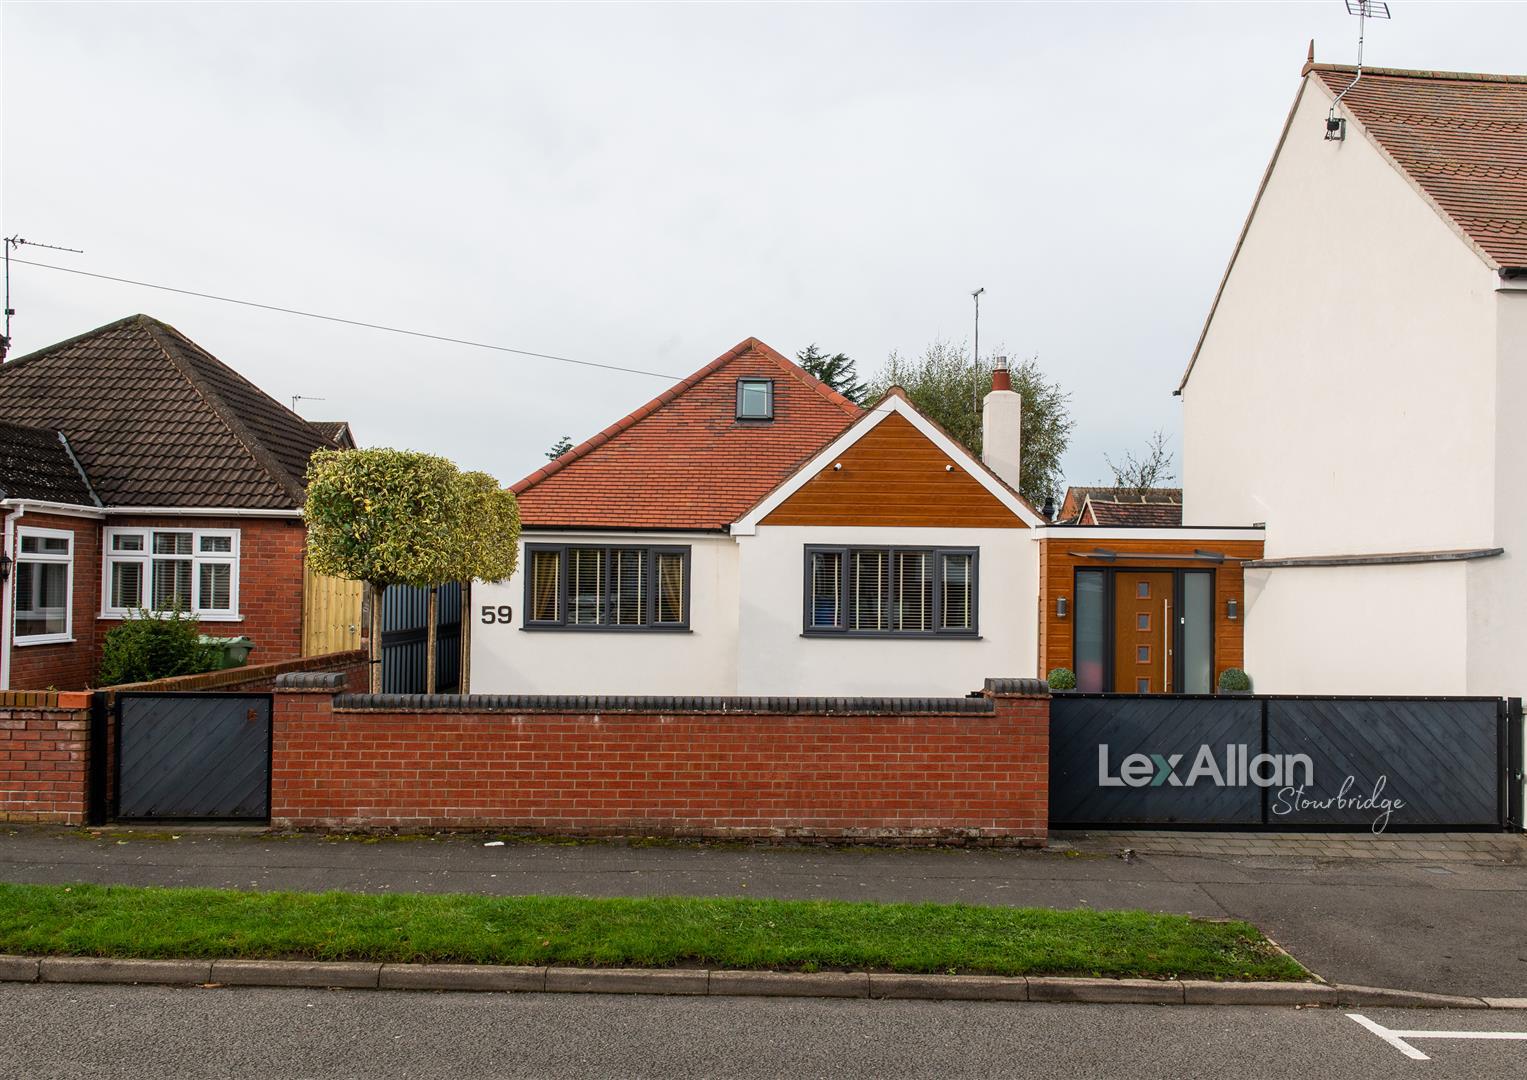 4 bed detached house for sale in Penzer Street, Kingswinford - Property Image 1